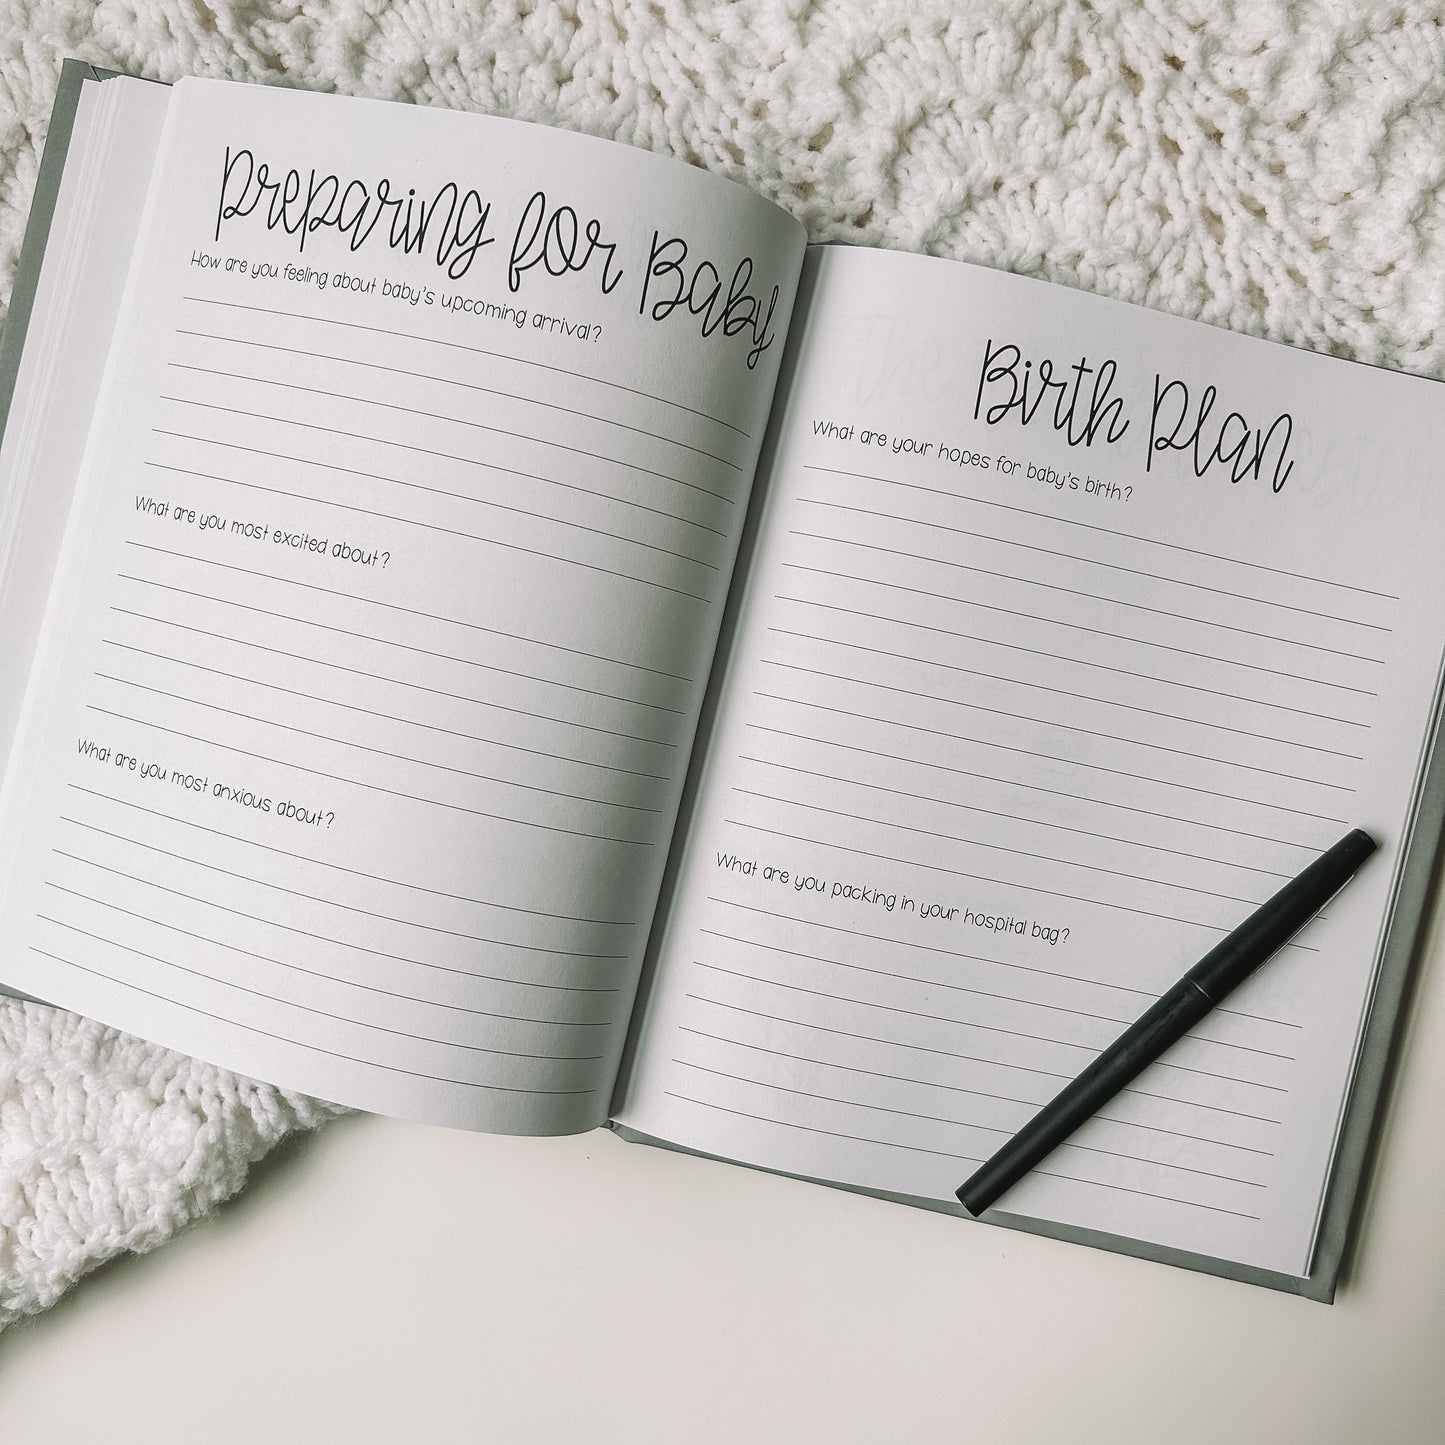 Two page spread features Preparing For Baby and three prompts on the left page and Birth Plan with two prompts on the right page.